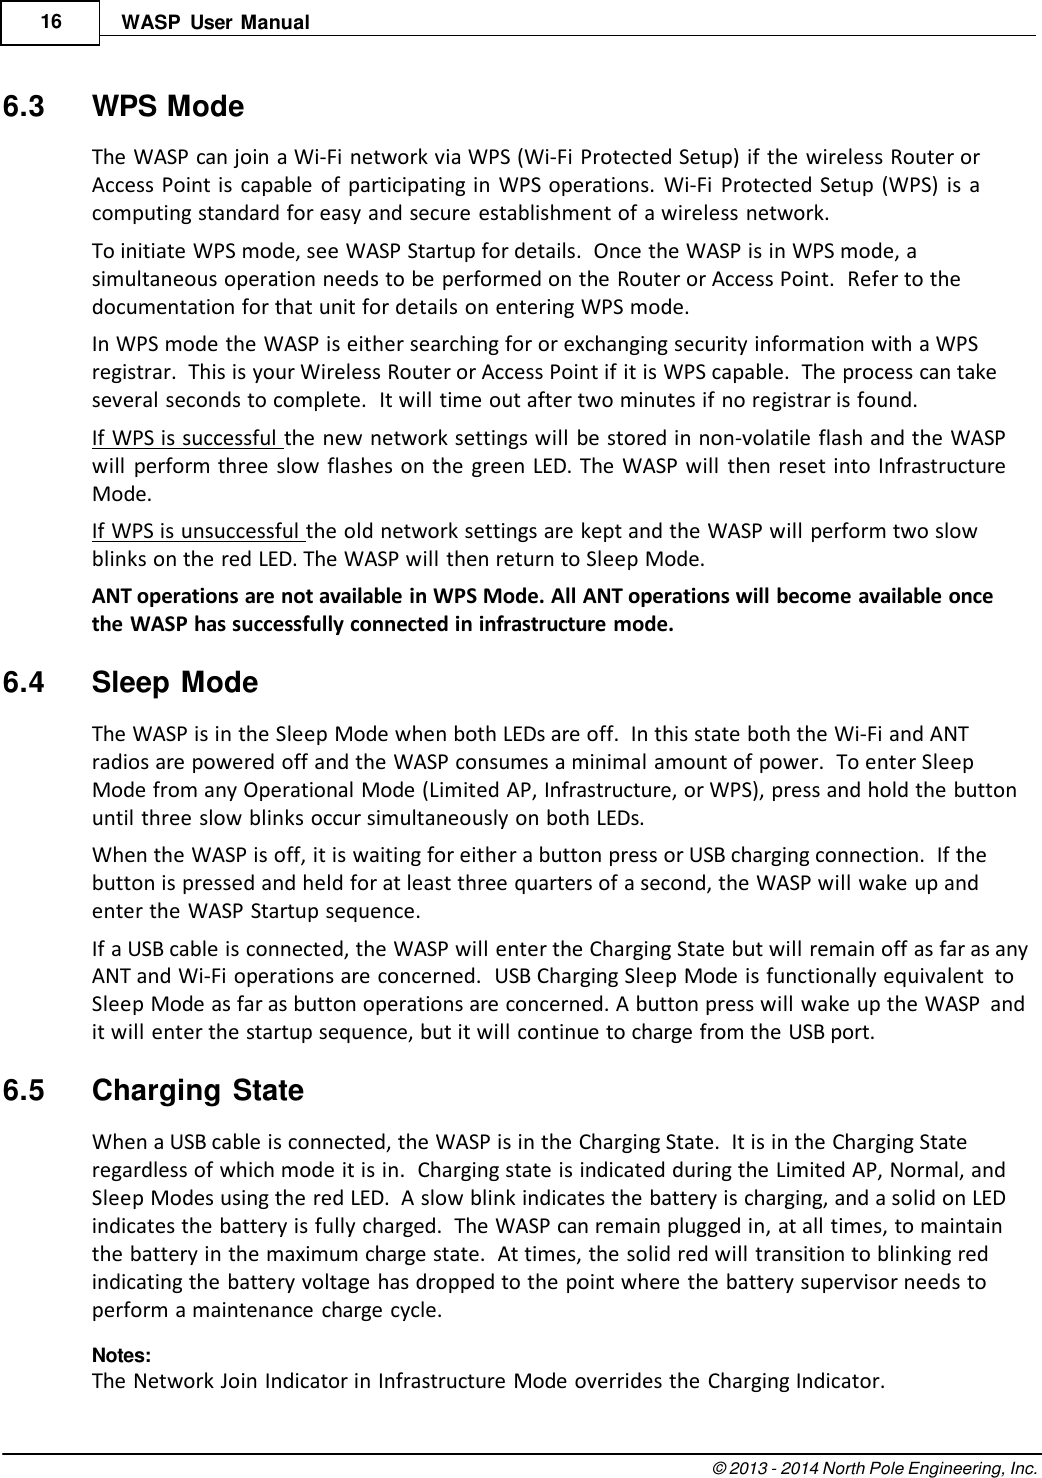 © 2013 - 2014 North Pole Engineering, Inc.    16 WASP  User  Manual   6.3  WPS Mode The WASP can join a Wi-Fi network via WPS (Wi-Fi Protected Setup) if the wireless Router or Access Point is  capable  of  participating in  WPS operations.  Wi-Fi  Protected Setup (WPS)  is  a computing standard for easy and secure establishment of a wireless network. To initiate WPS mode, see WASP Startup for details.  Once the WASP is in WPS mode, a simultaneous operation needs to be performed on the Router or Access Point.  Refer to the documentation for that unit for details on entering WPS mode. In WPS mode the WASP is either searching for or exchanging security information with a WPS registrar.  This is your Wireless Router or Access Point if it is WPS capable.  The process can take several seconds to complete.  It will time out after two minutes if no registrar is found. If WPS is successful the new network settings will be stored in non-volatile flash and the WASP will  perform three  slow  flashes on  the  green  LED.  The  WASP will  then reset into Infrastructure Mode. If WPS is unsuccessful the old network settings are kept and the WASP will perform two slow blinks on the red LED. The WASP will then return to Sleep Mode. ANT operations are not available in WPS Mode. All ANT operations will become available once the WASP has successfully connected in infrastructure mode.  6.4  Sleep Mode The WASP is in the Sleep Mode when both LEDs are off.  In this state both the Wi-Fi and ANT radios are powered off and the WASP consumes a minimal amount of power.  To enter Sleep Mode from any Operational Mode (Limited AP, Infrastructure, or WPS), press and hold the button until three slow blinks occur simultaneously on both LEDs. When the WASP is off, it is waiting for either a button press or USB charging connection.  If the button is pressed and held for at least three quarters of a second, the WASP will wake up and enter the WASP Startup sequence. If a USB cable is connected, the WASP will enter the Charging State but will remain off as far as any ANT and Wi-Fi operations are concerned.  USB Charging Sleep Mode is functionally equivalent  to Sleep Mode as far as button operations are concerned. A button press will wake up the WASP  and it will enter the startup sequence, but it will continue to charge from the USB port.  6.5  Charging State When a USB cable is connected, the WASP is in the Charging State.  It is in the Charging State regardless of which mode it is in.  Charging state is indicated during the Limited AP, Normal, and Sleep Modes using the red LED.  A slow blink indicates the battery is charging, and a solid on LED indicates the battery is fully charged.  The WASP can remain plugged in, at all times, to maintain the battery in the maximum charge state.  At times, the solid red will transition to blinking red indicating the battery voltage has dropped to the point where the battery supervisor needs to perform a maintenance  charge cycle. Notes: The Network Join Indicator in Infrastructure Mode overrides the Charging Indicator. 